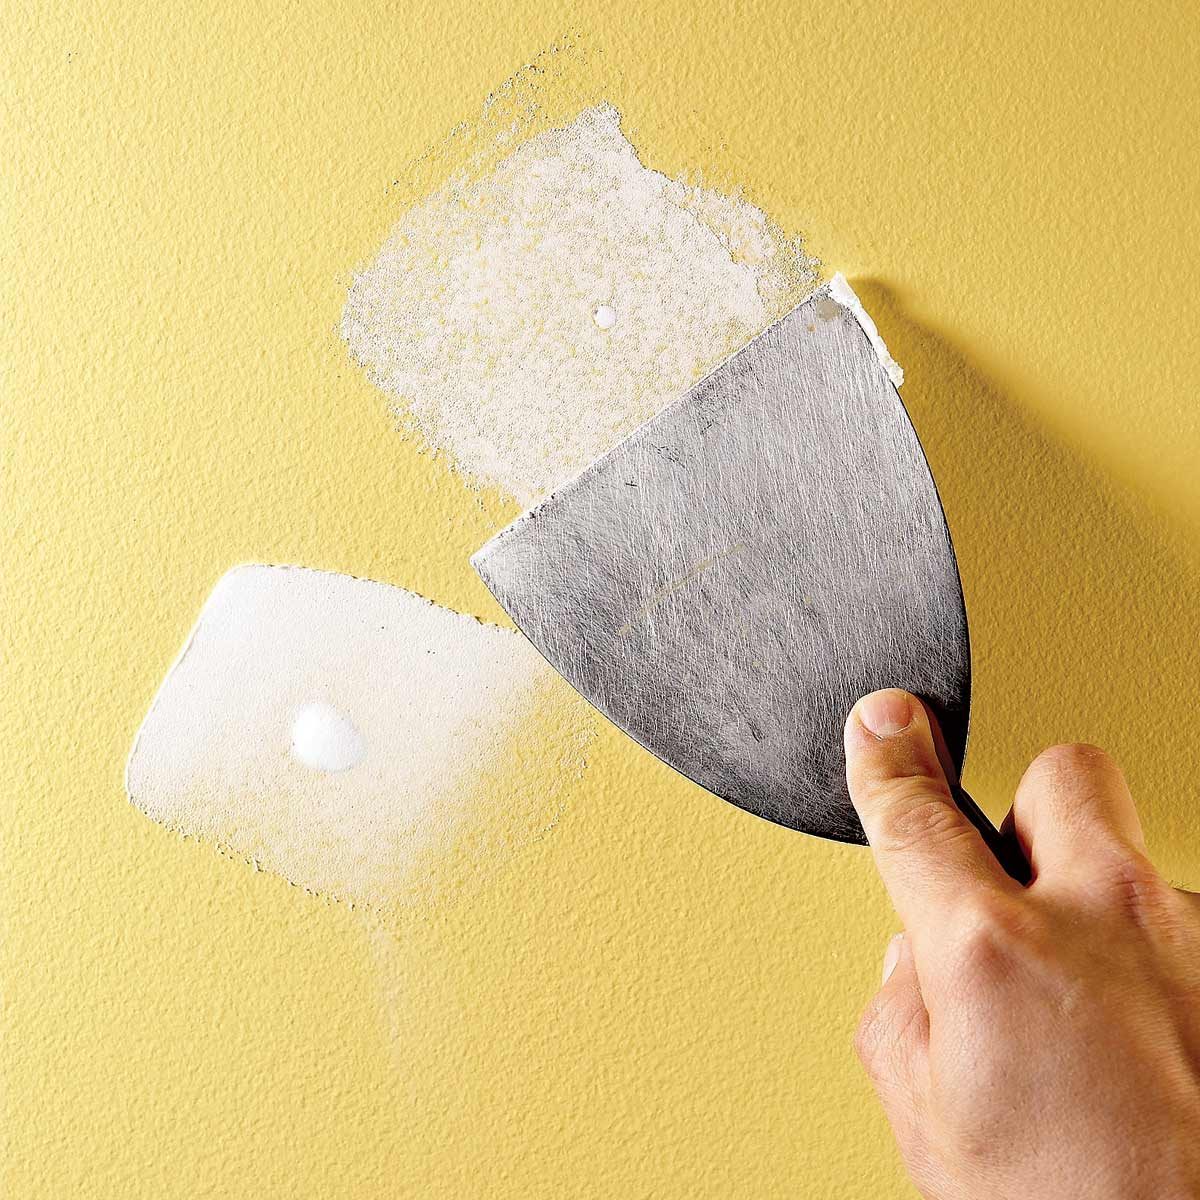 How to patch drywall - 100 Things 2 Do